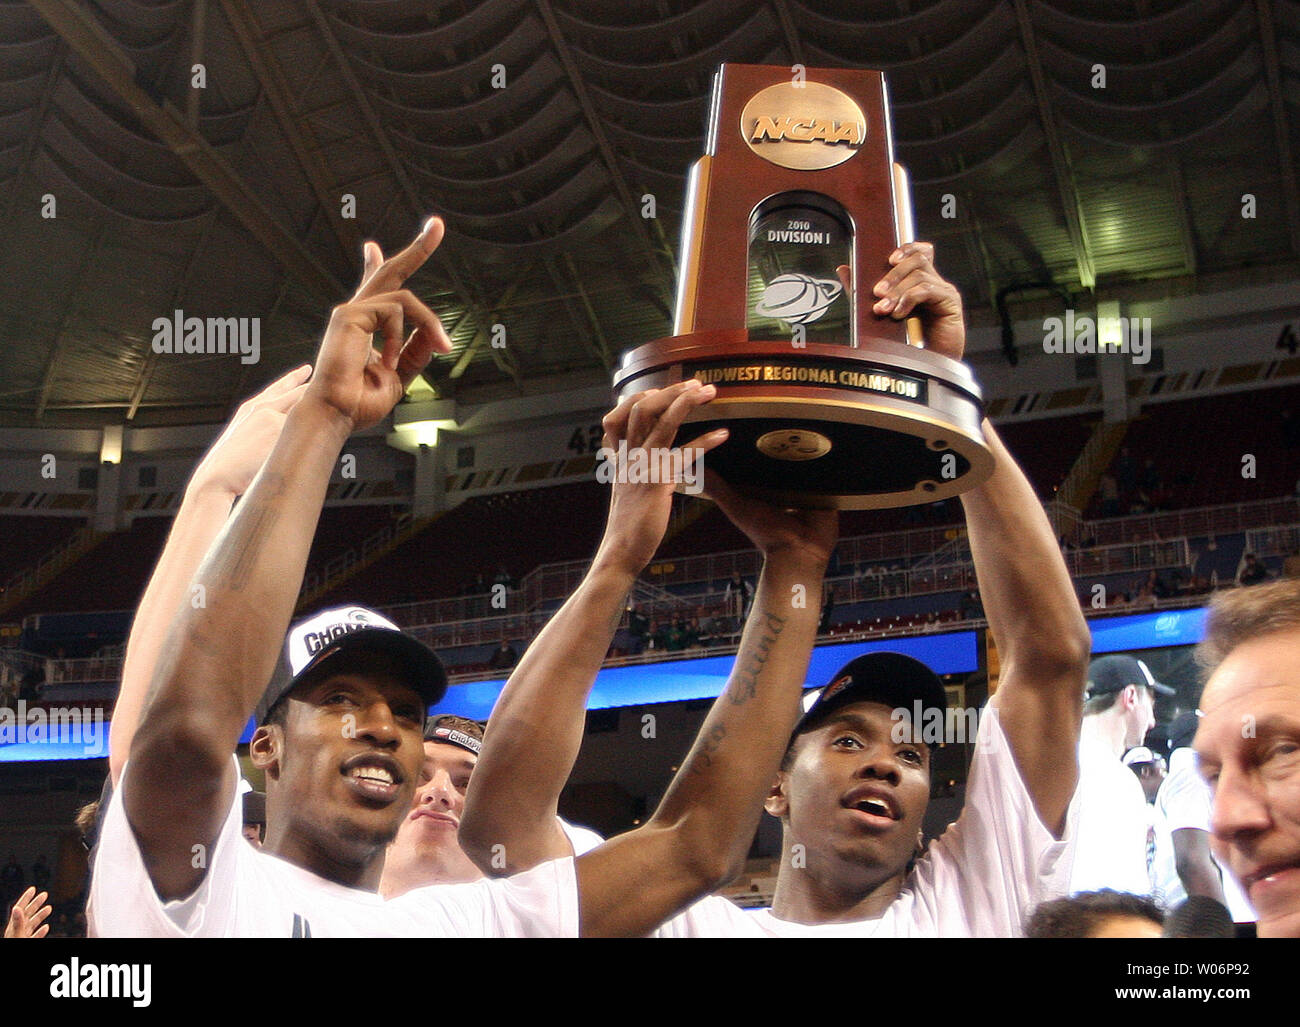 Members of the Michigan State basketball team hoist the winners trophy in  the NCAA Midwest Regional Championship game at the Edward Jones Dome in St.  Louis on March 28, 2010. Michigan State